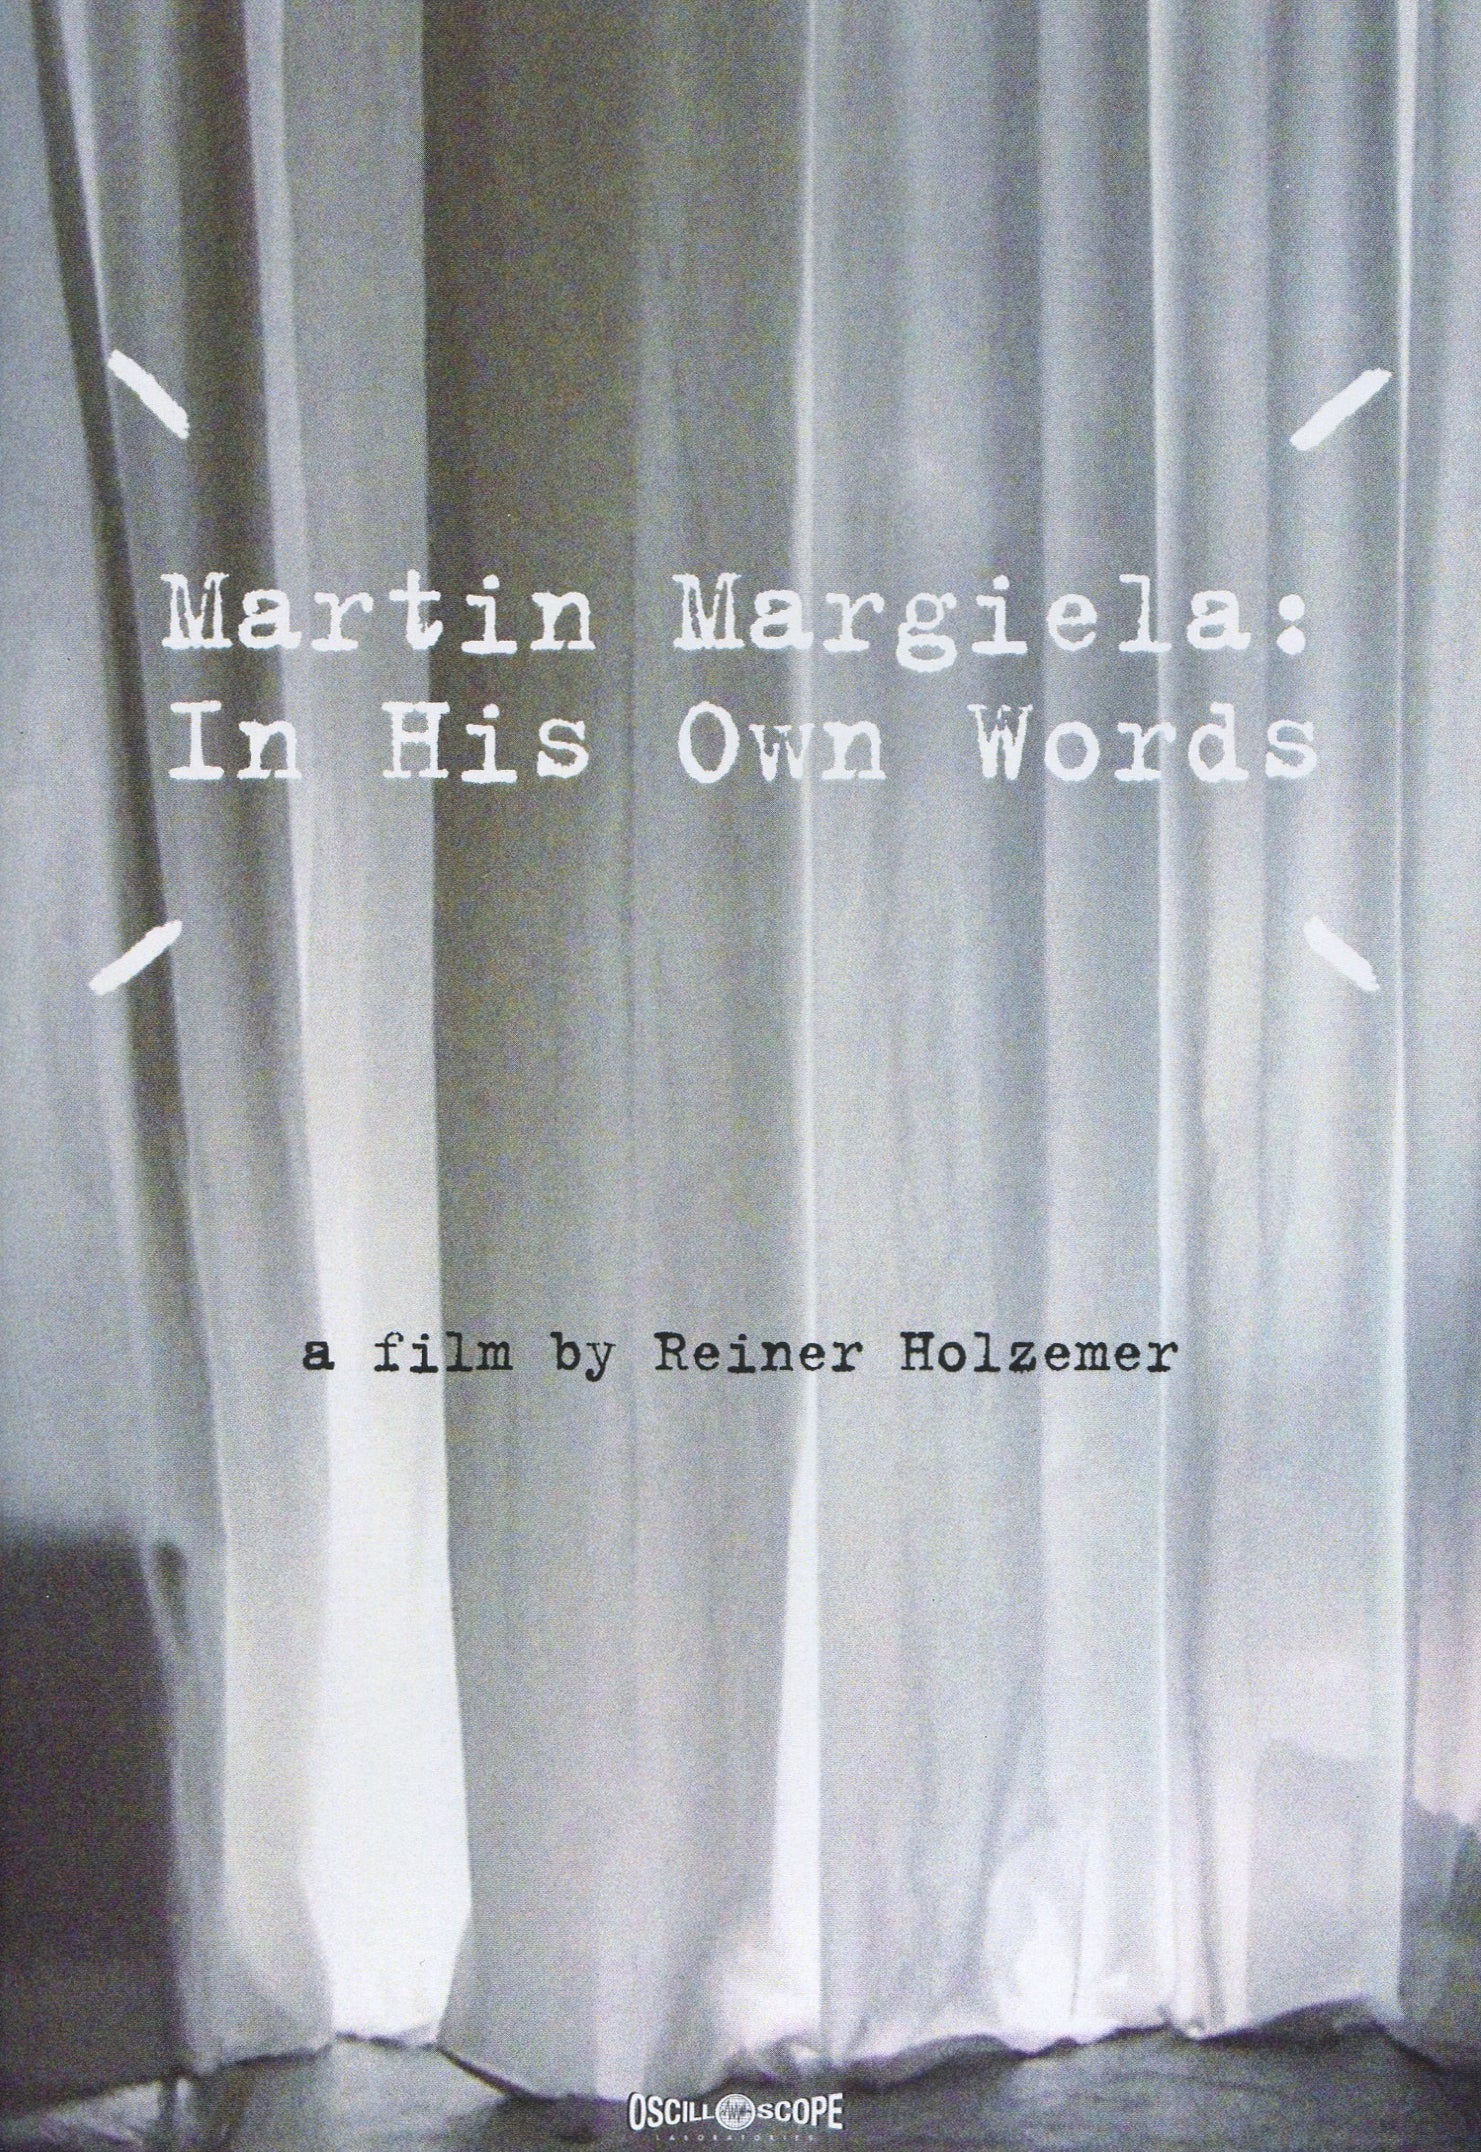 Martin Margiela: In His Own Words – MovieMars